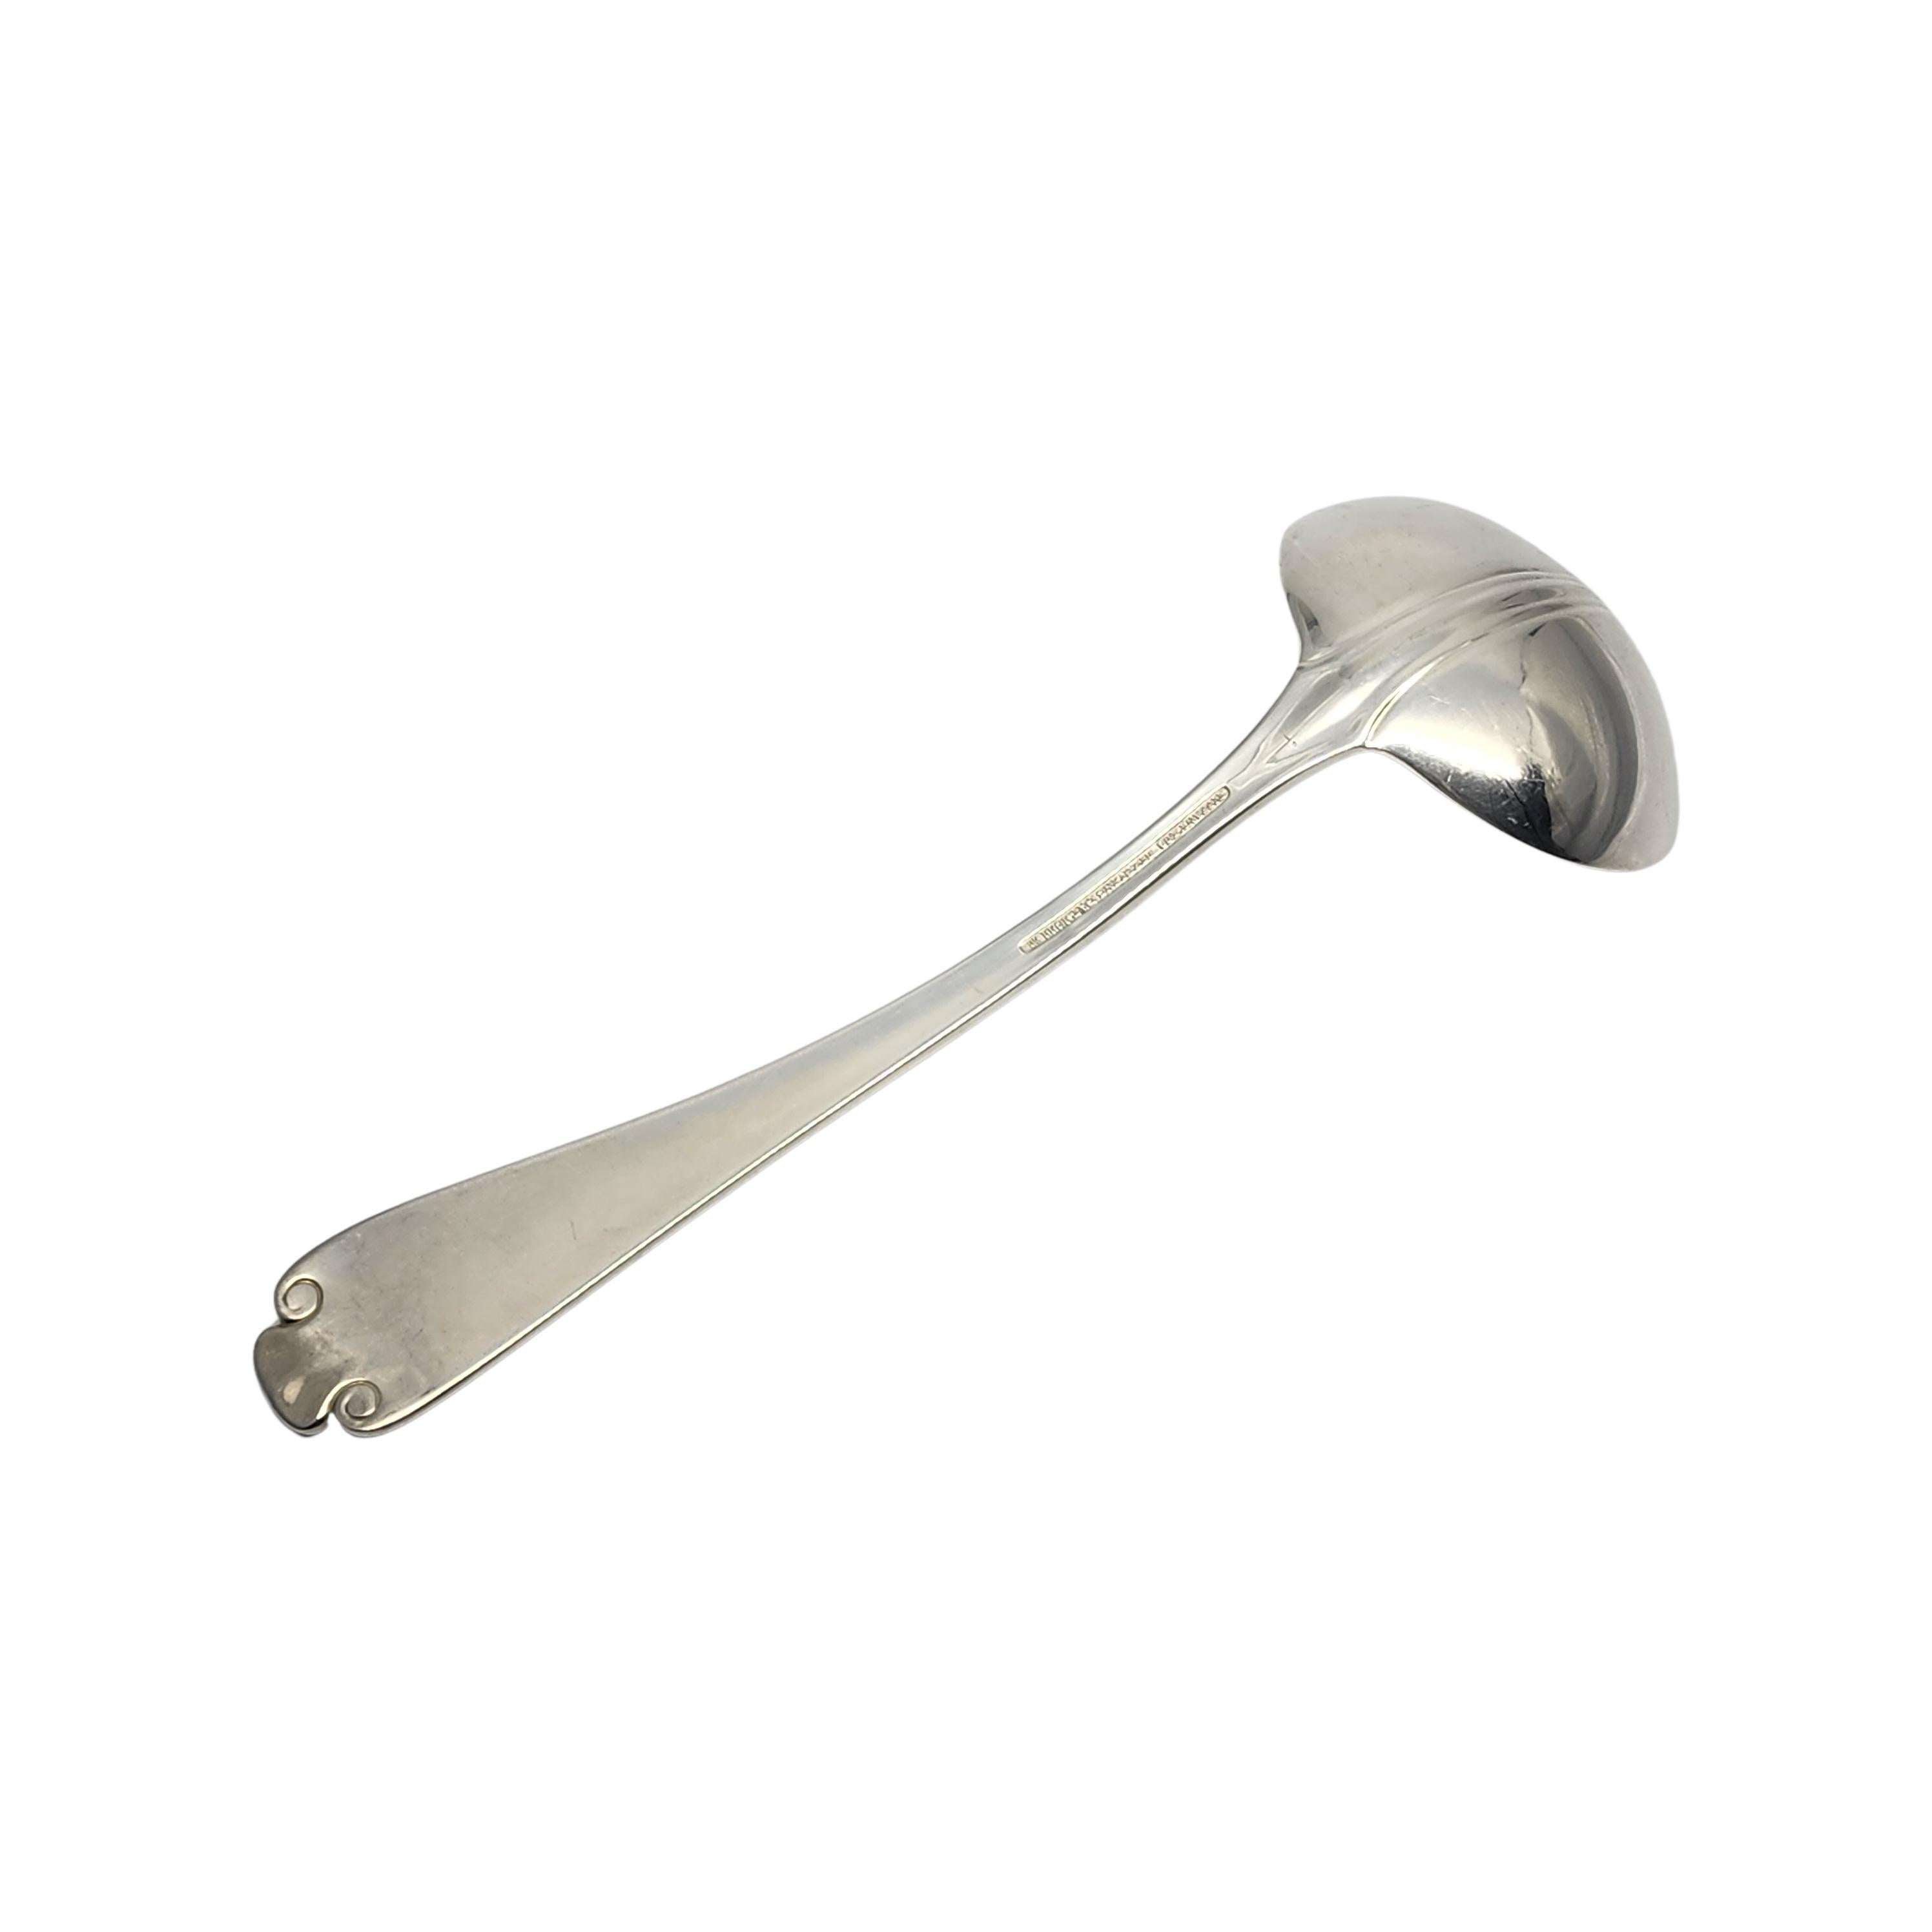 Sterling silver gravy ladle by Tiffany & Co in the Flemish pattern.

No monogram.

The Flemish pattern features a simple and elegant scroll design, making it a timeless classic that is still in demand today. Hallmarks date this piece to manufacture